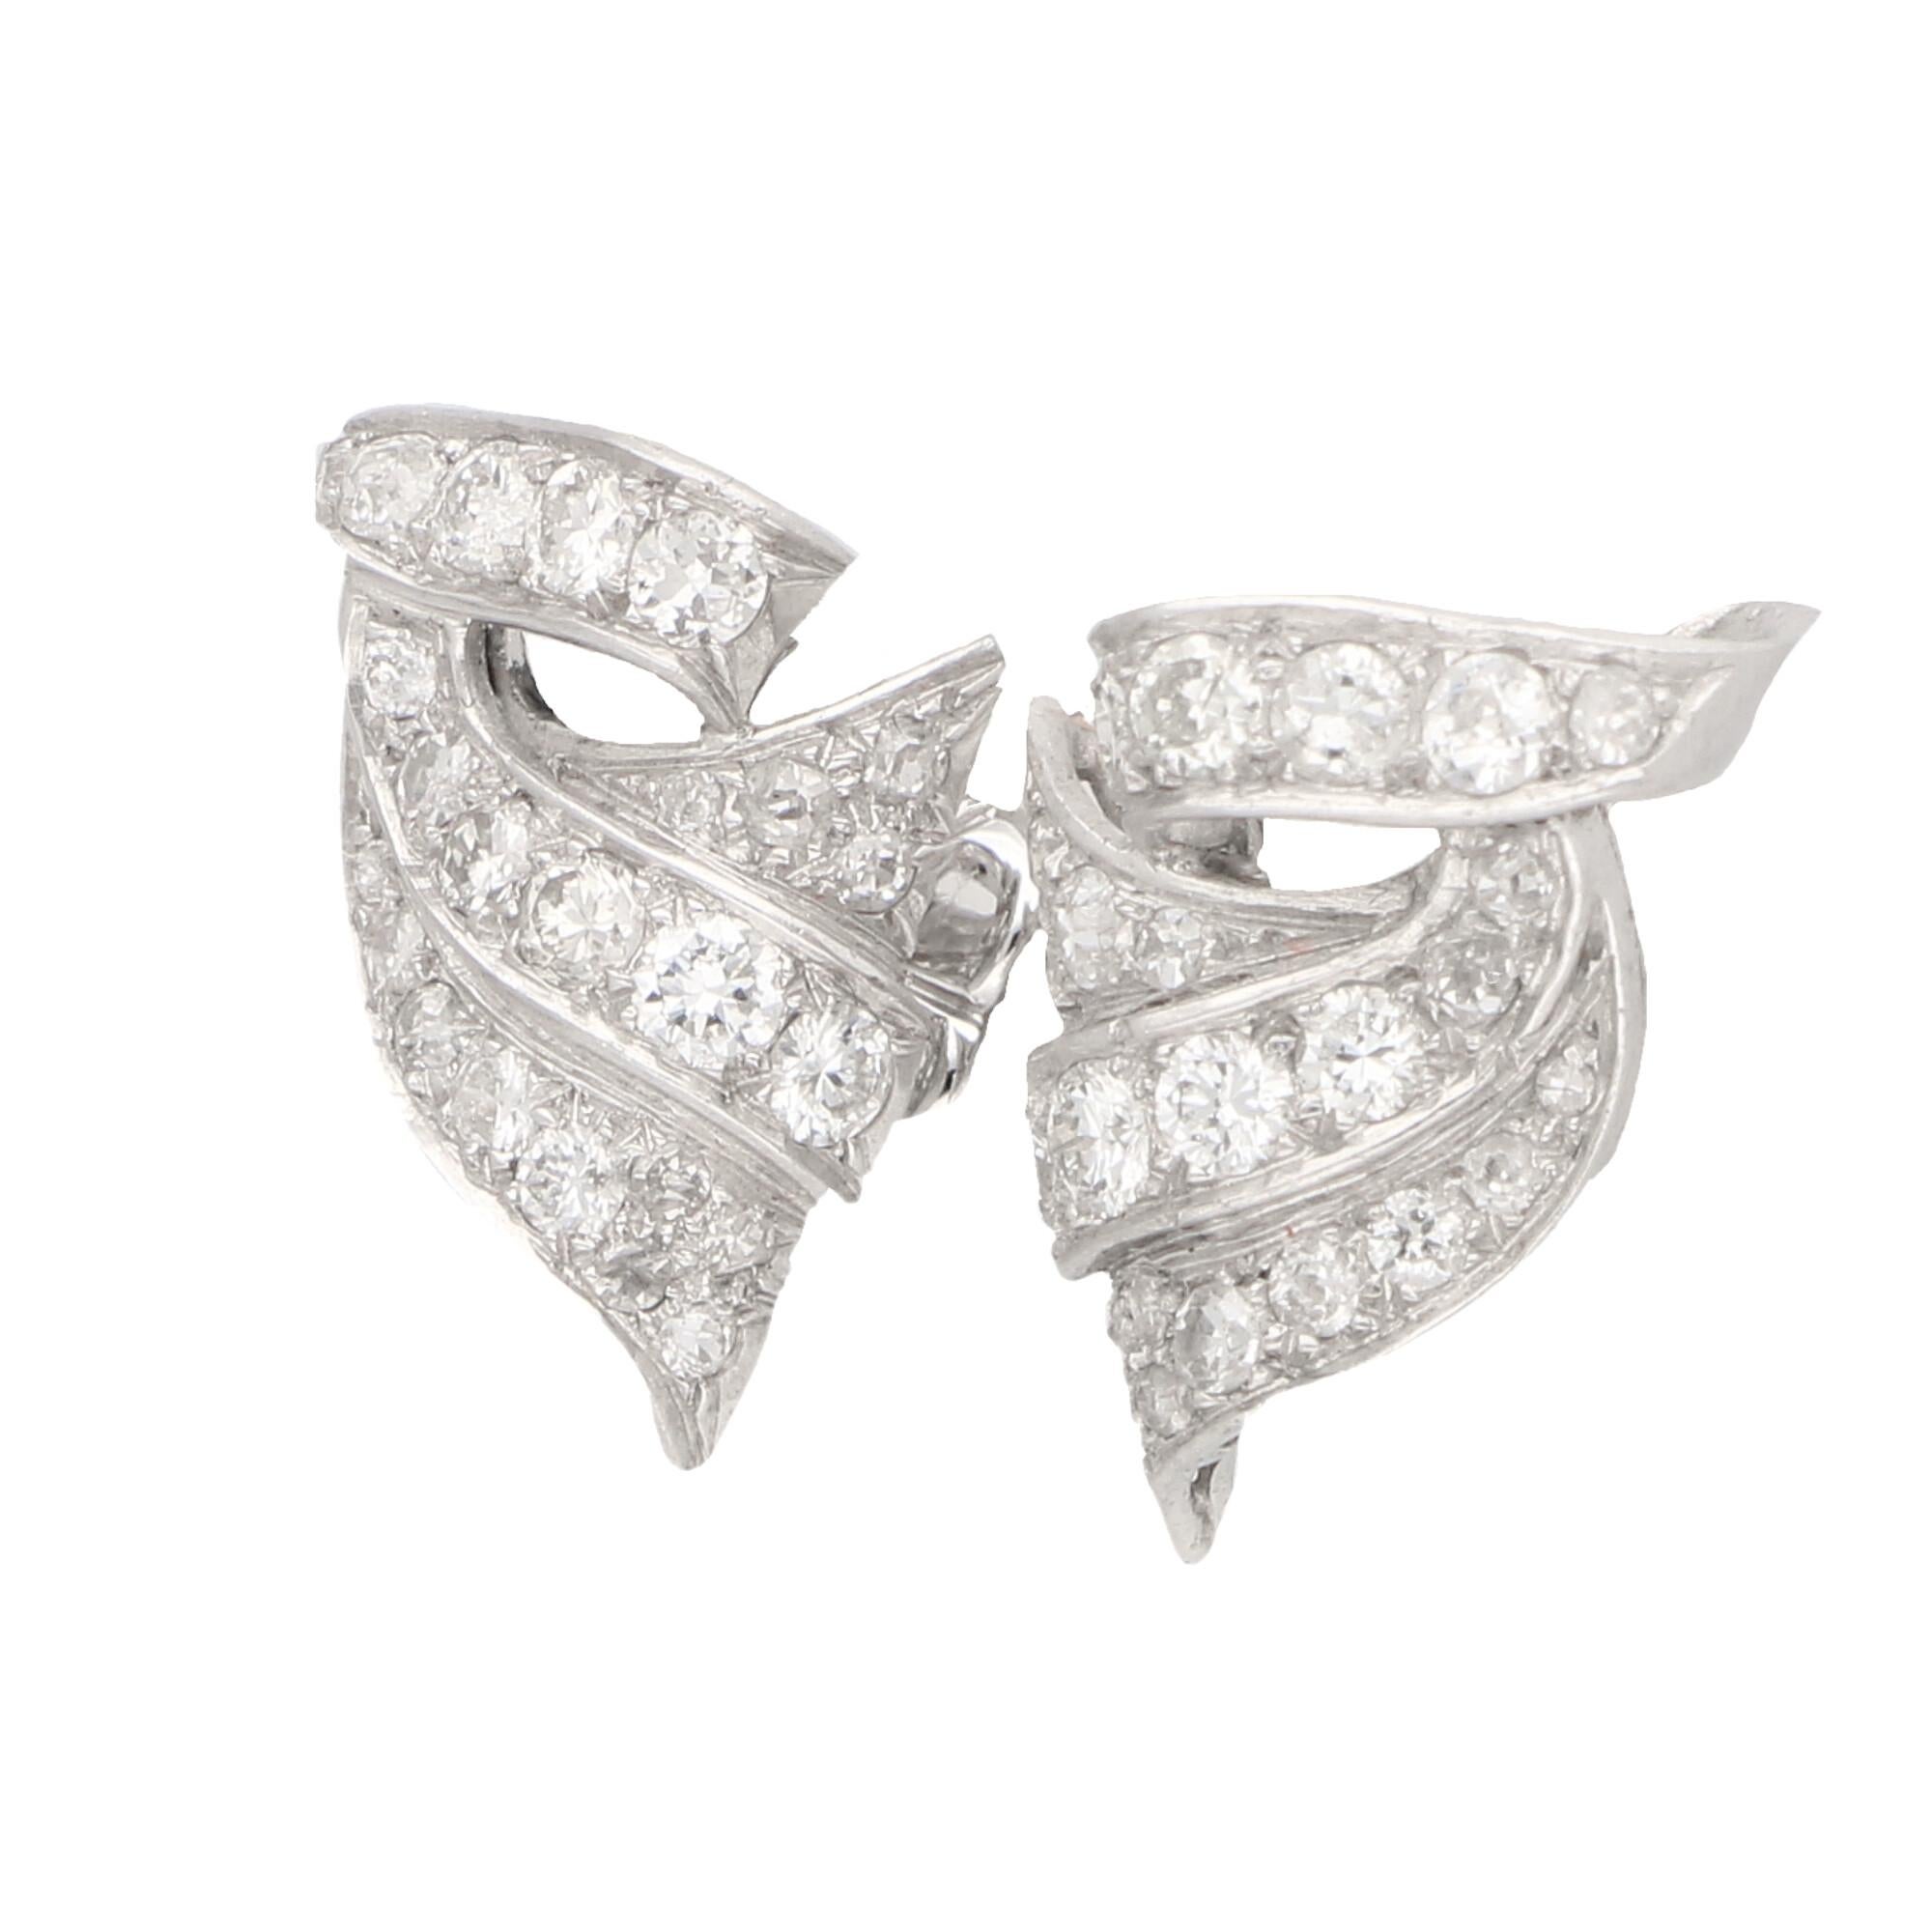 Art Deco Style Old Mine Cut Diamond Scroll Earrings Set in Platinum In Good Condition For Sale In London, GB